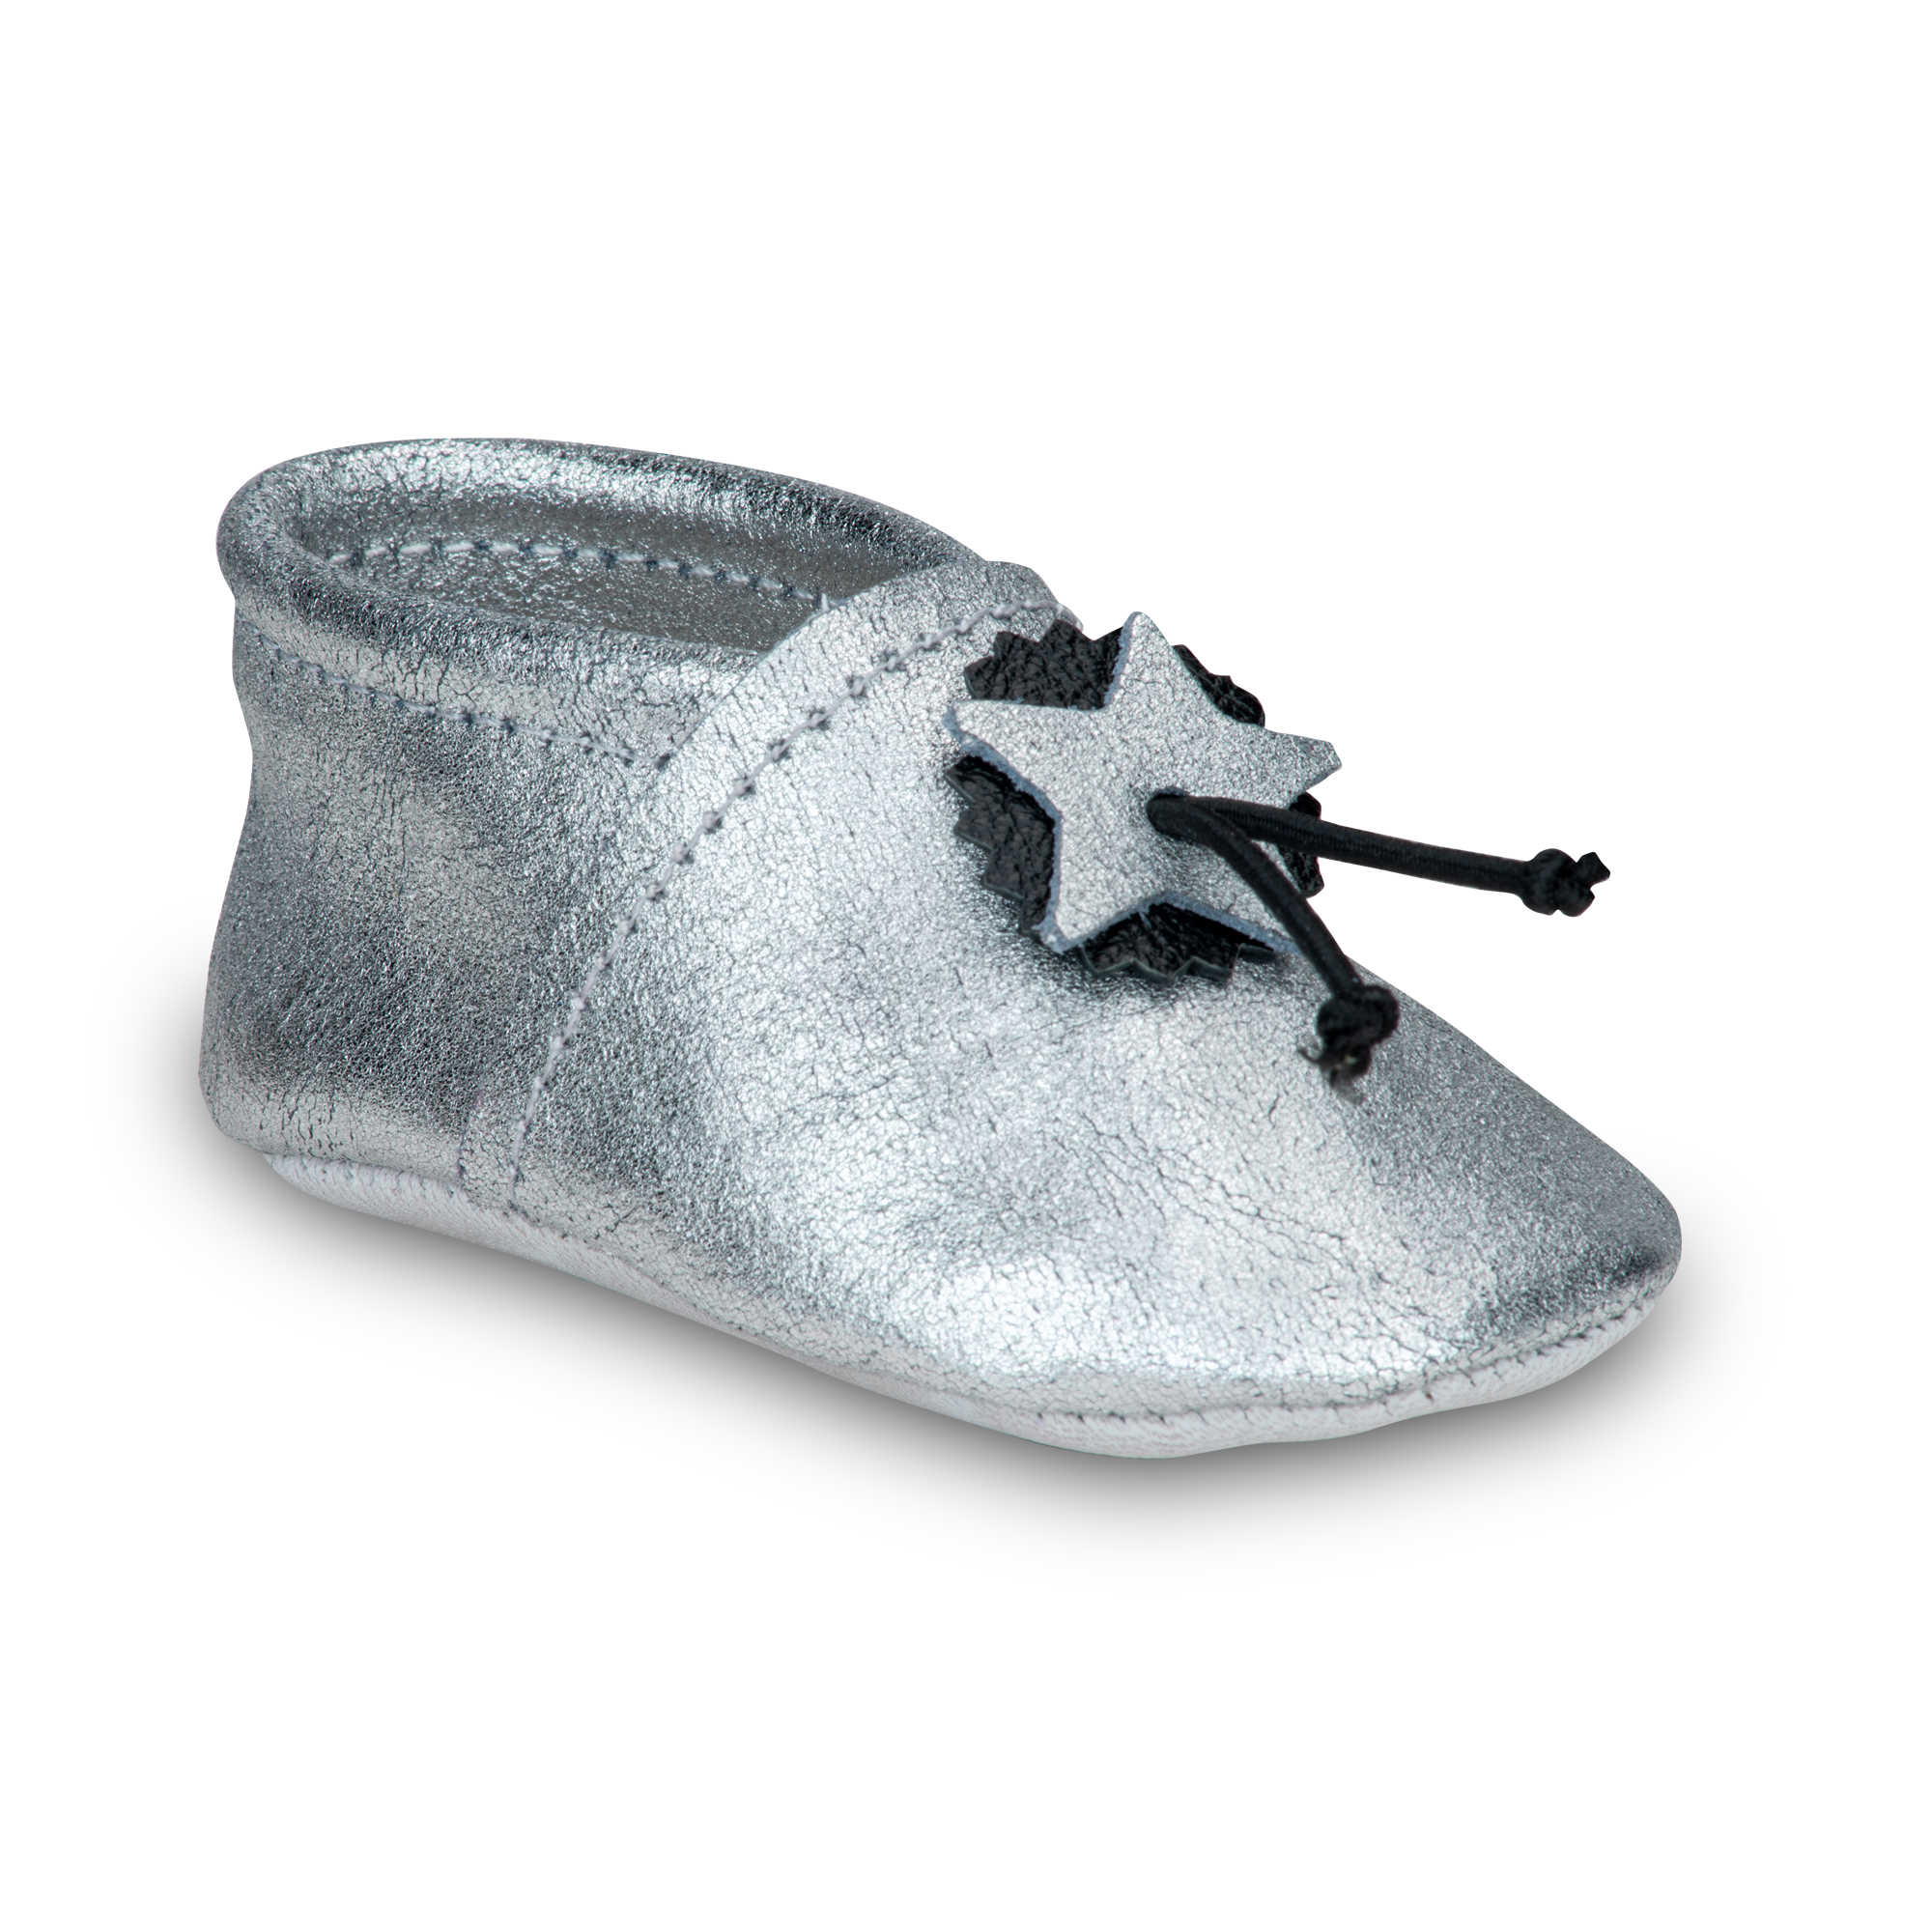 Chaussons souples bebe argente taille 20